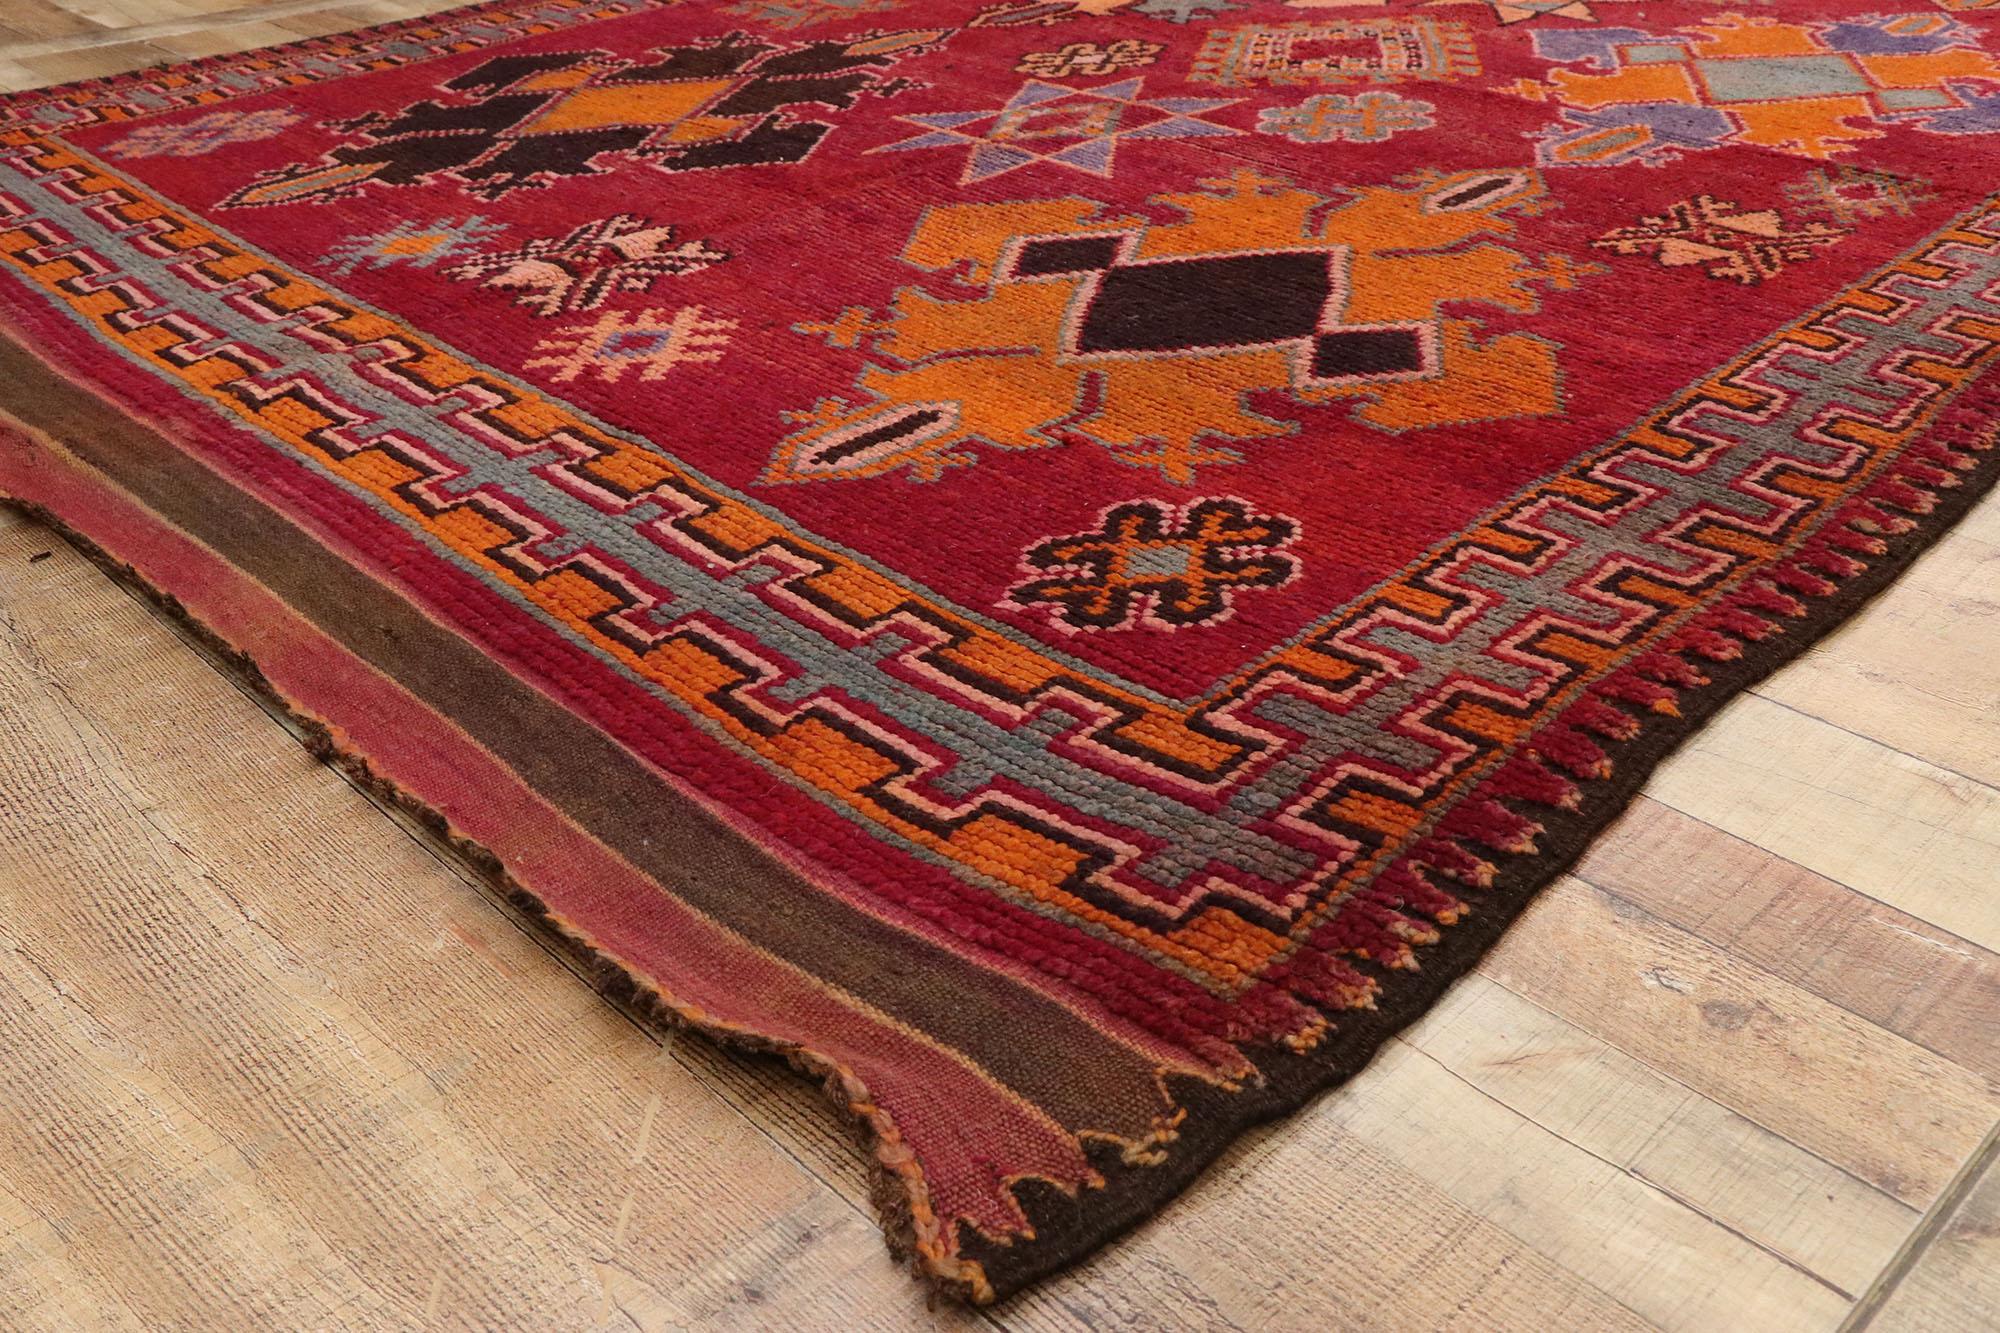 20th Century Vintage Red Boujad Moroccan Rug, Boho Chic Meets Worldly Sophistication